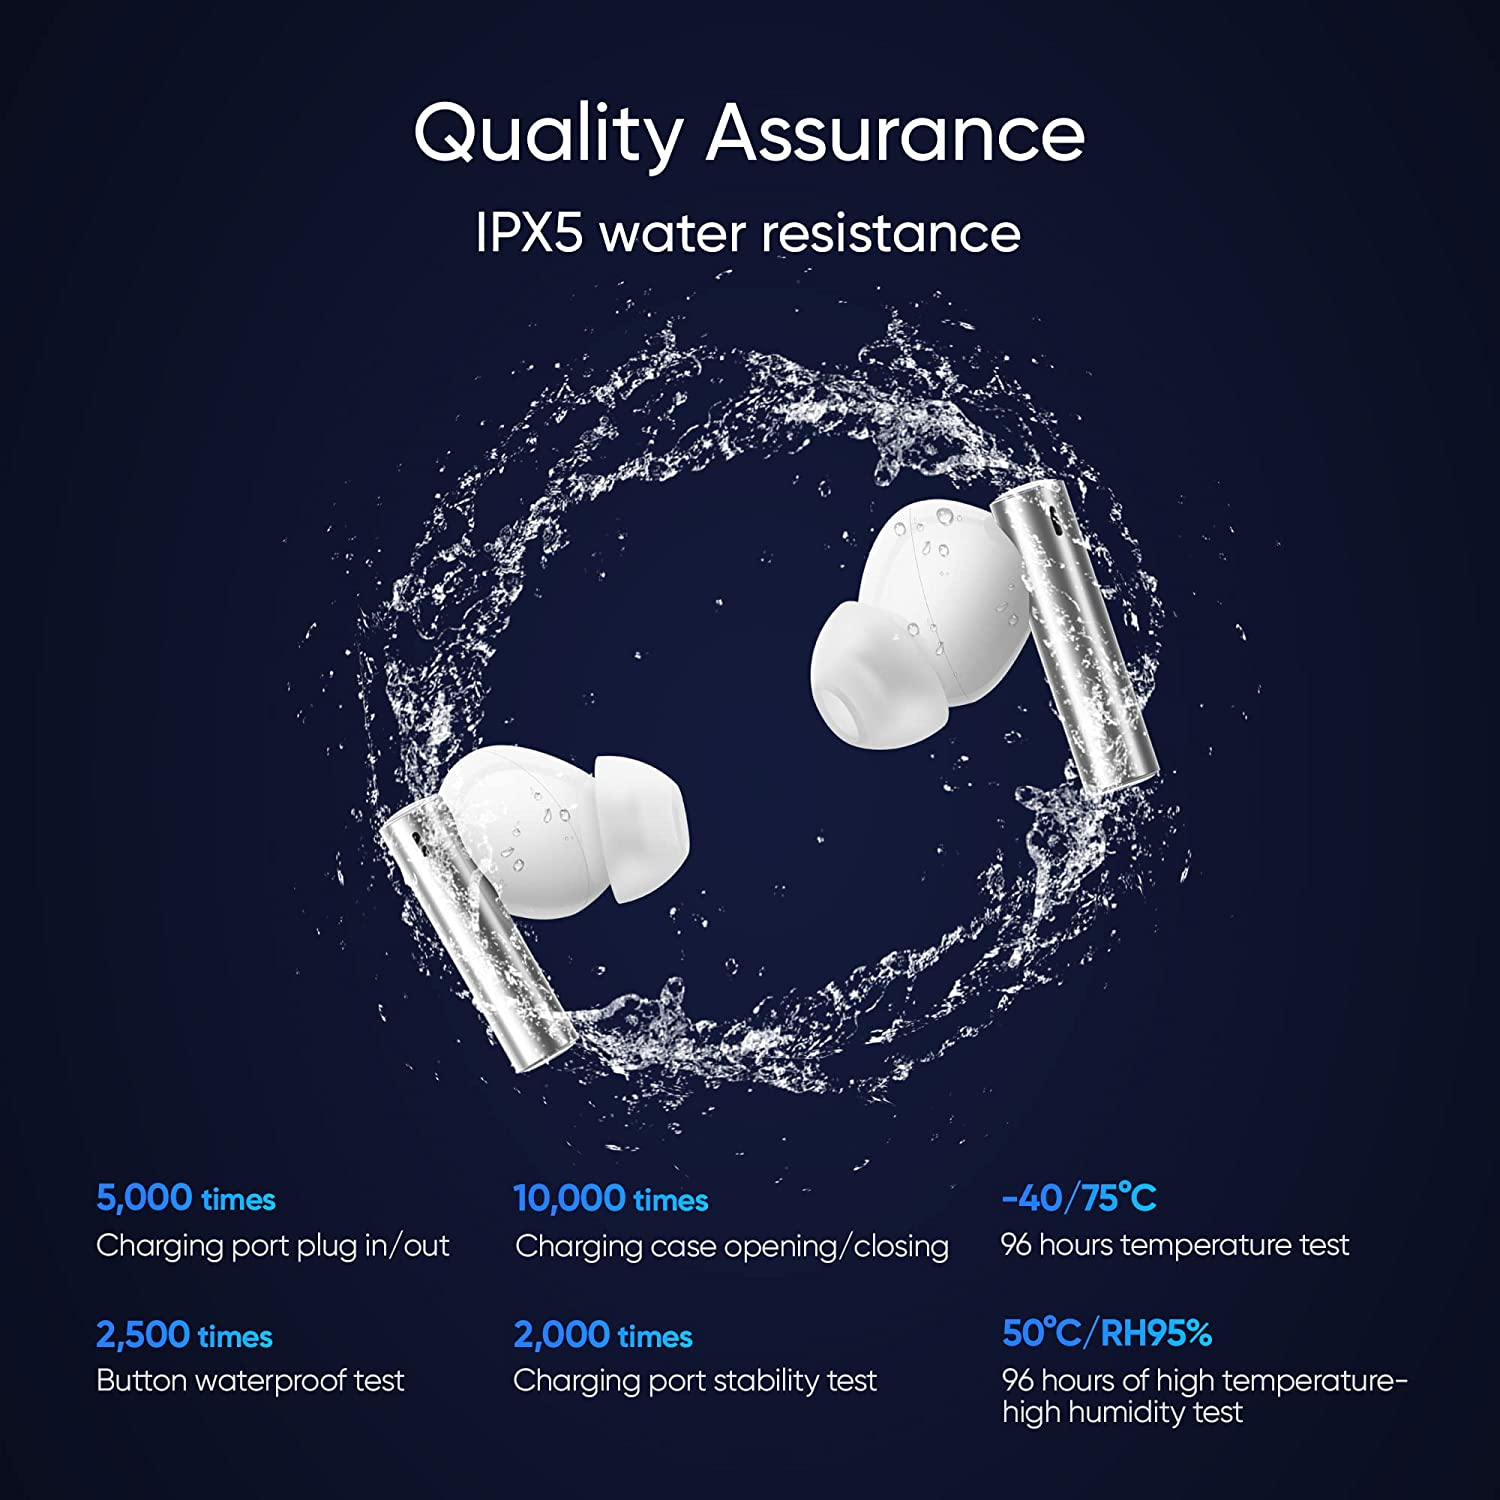 realme Buds Air 3 Wireless Earbuds, Active Noise Cancellation, 10mm Dynamic  Bass Boost Driver, Up to 30 Hours Playtime, IPX5 Water Resistance - (White)  